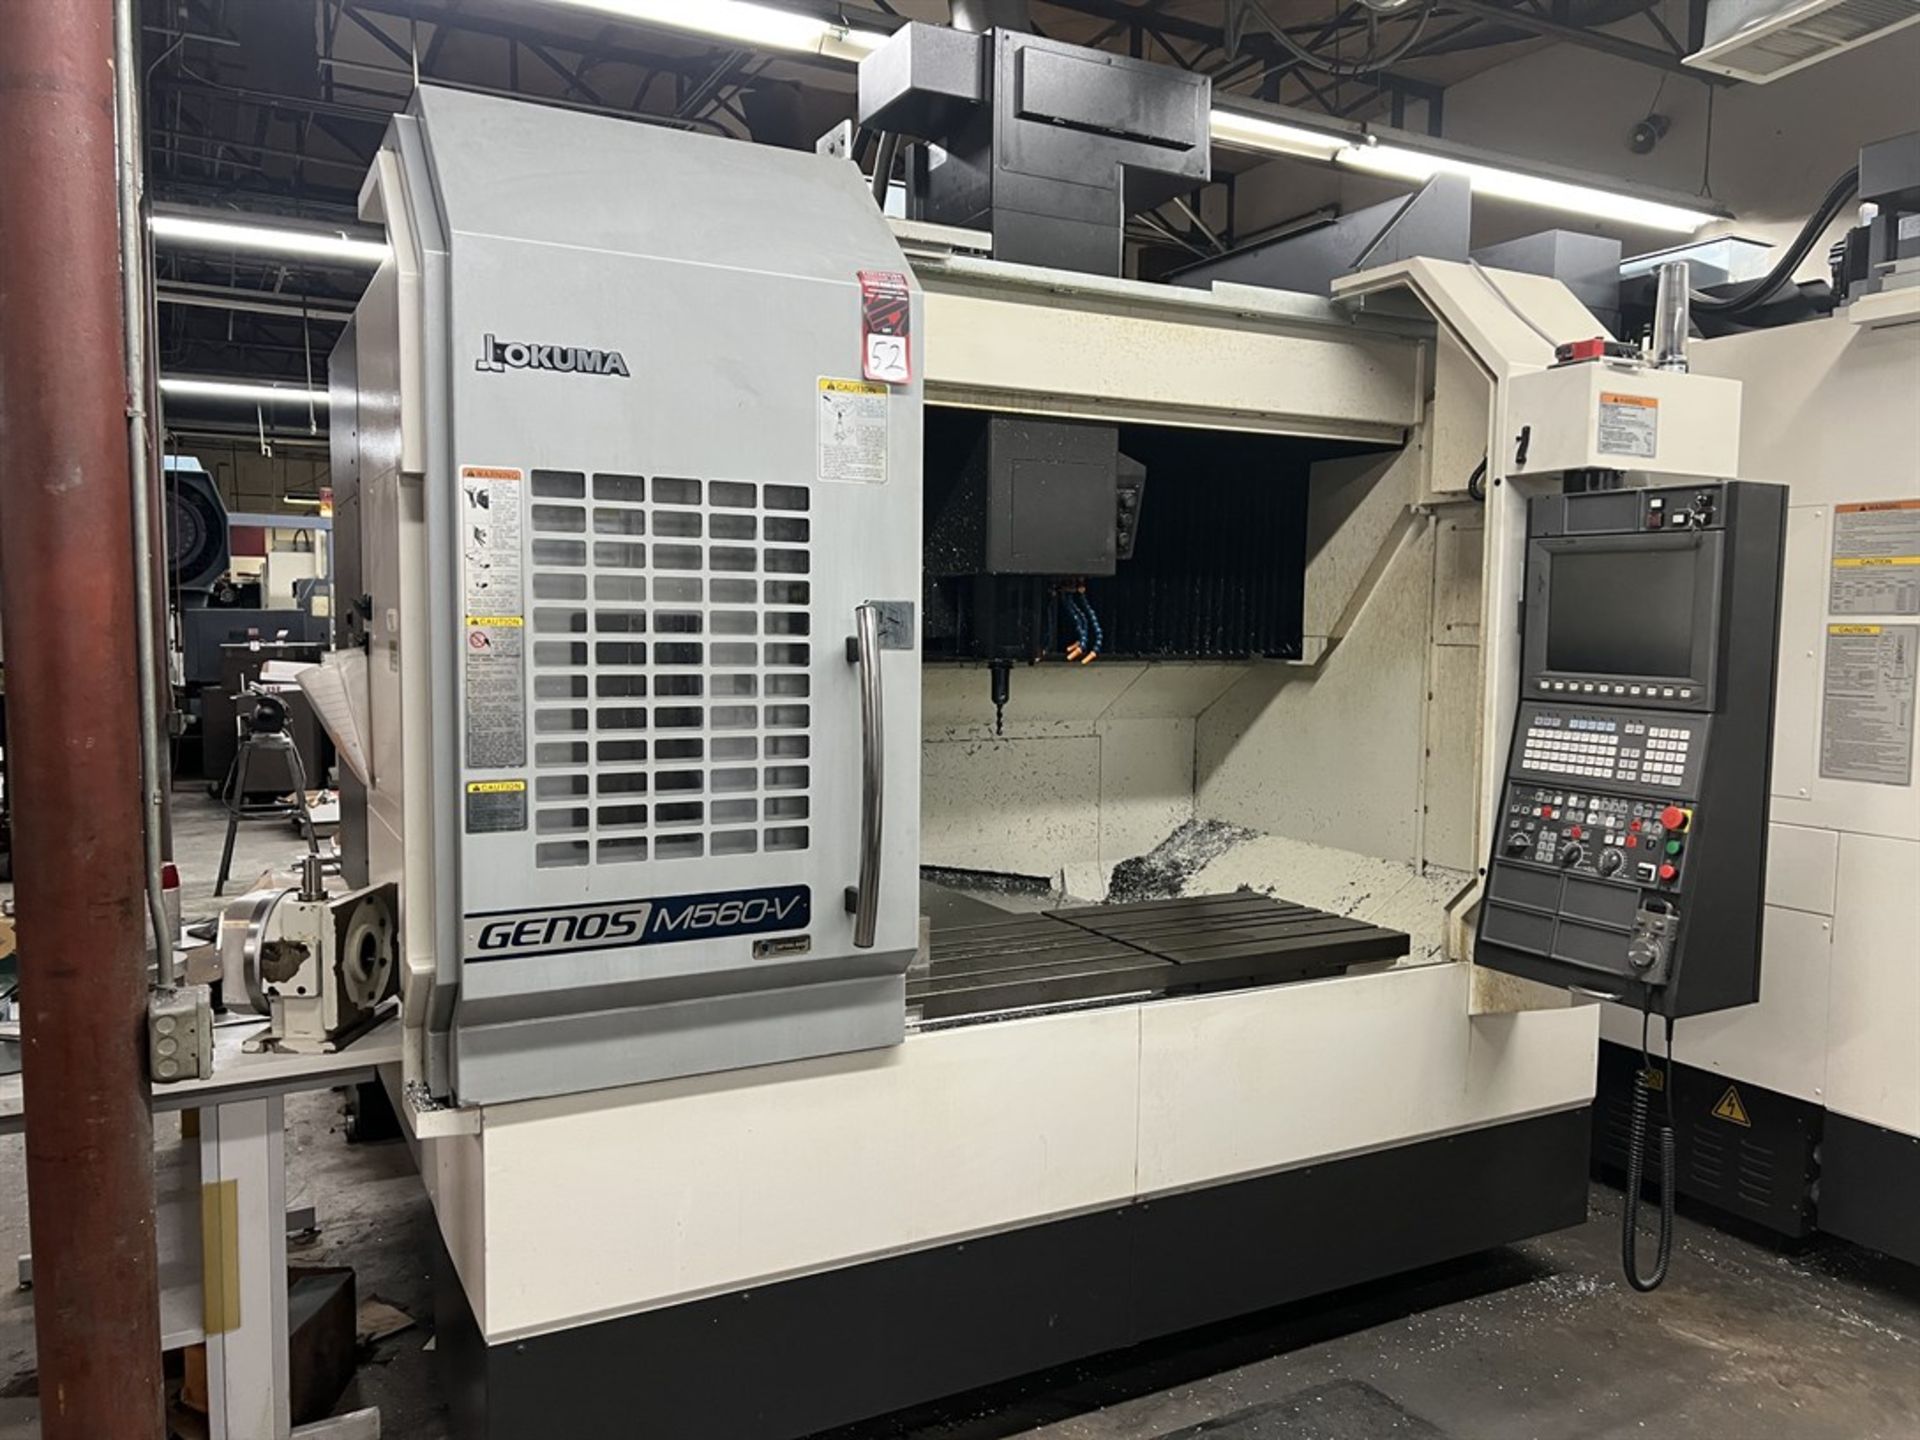 2016 OKUMA GENOS M560-V Vertical Machining Center, s/n 191947, 22” x 51” Table, CT40 Spindle